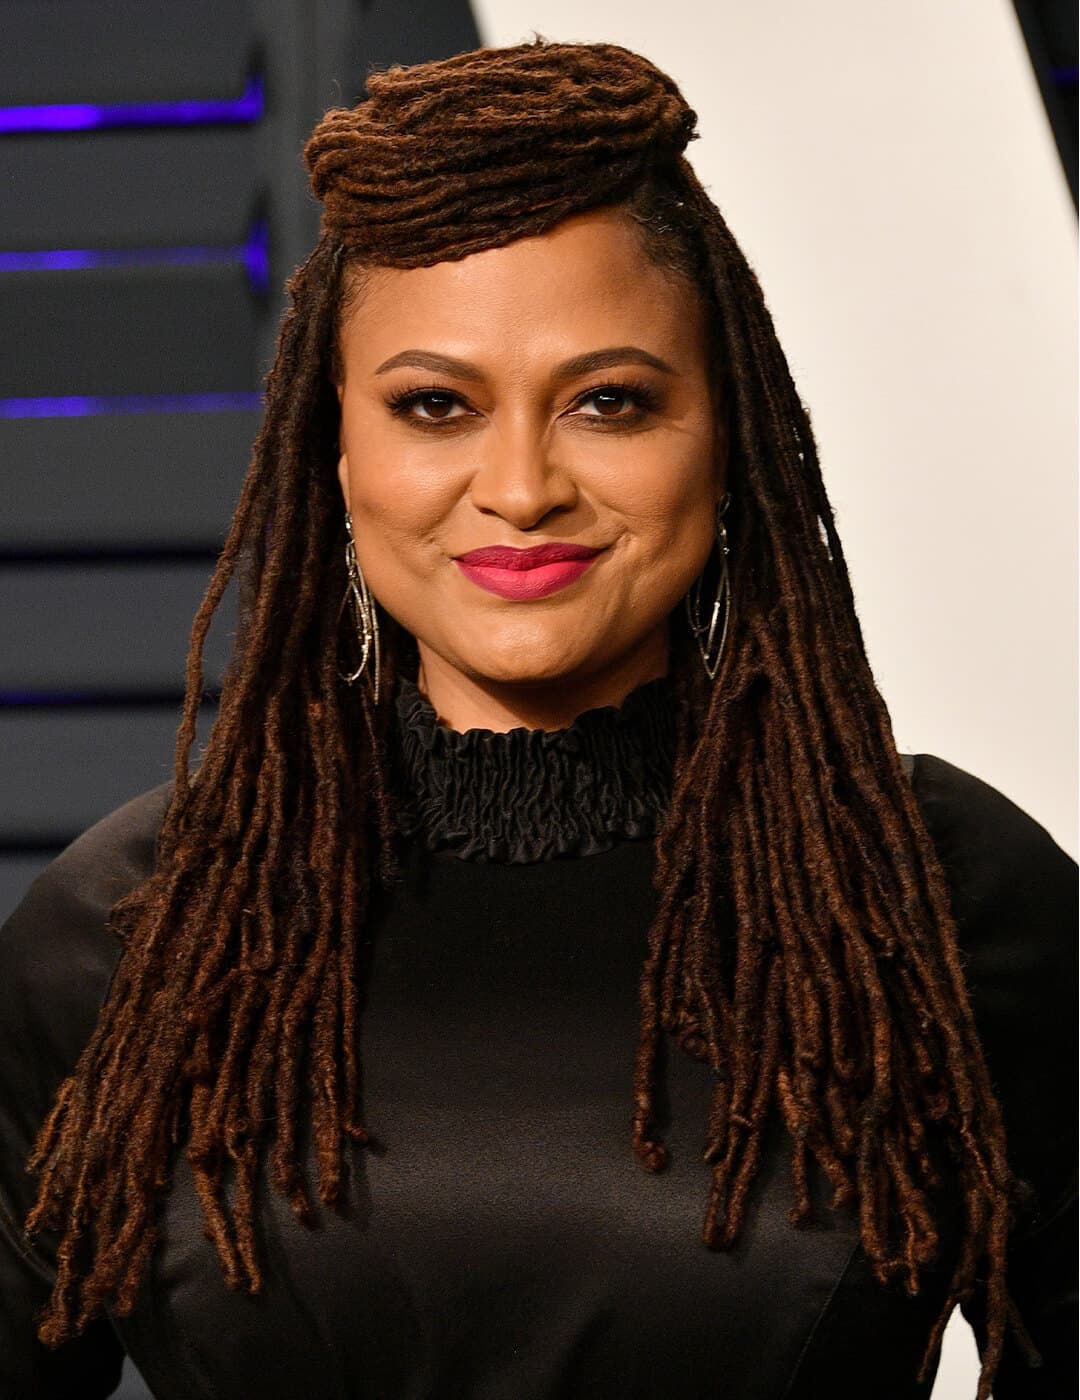 Ava DuVernay rocking her locs while smiling